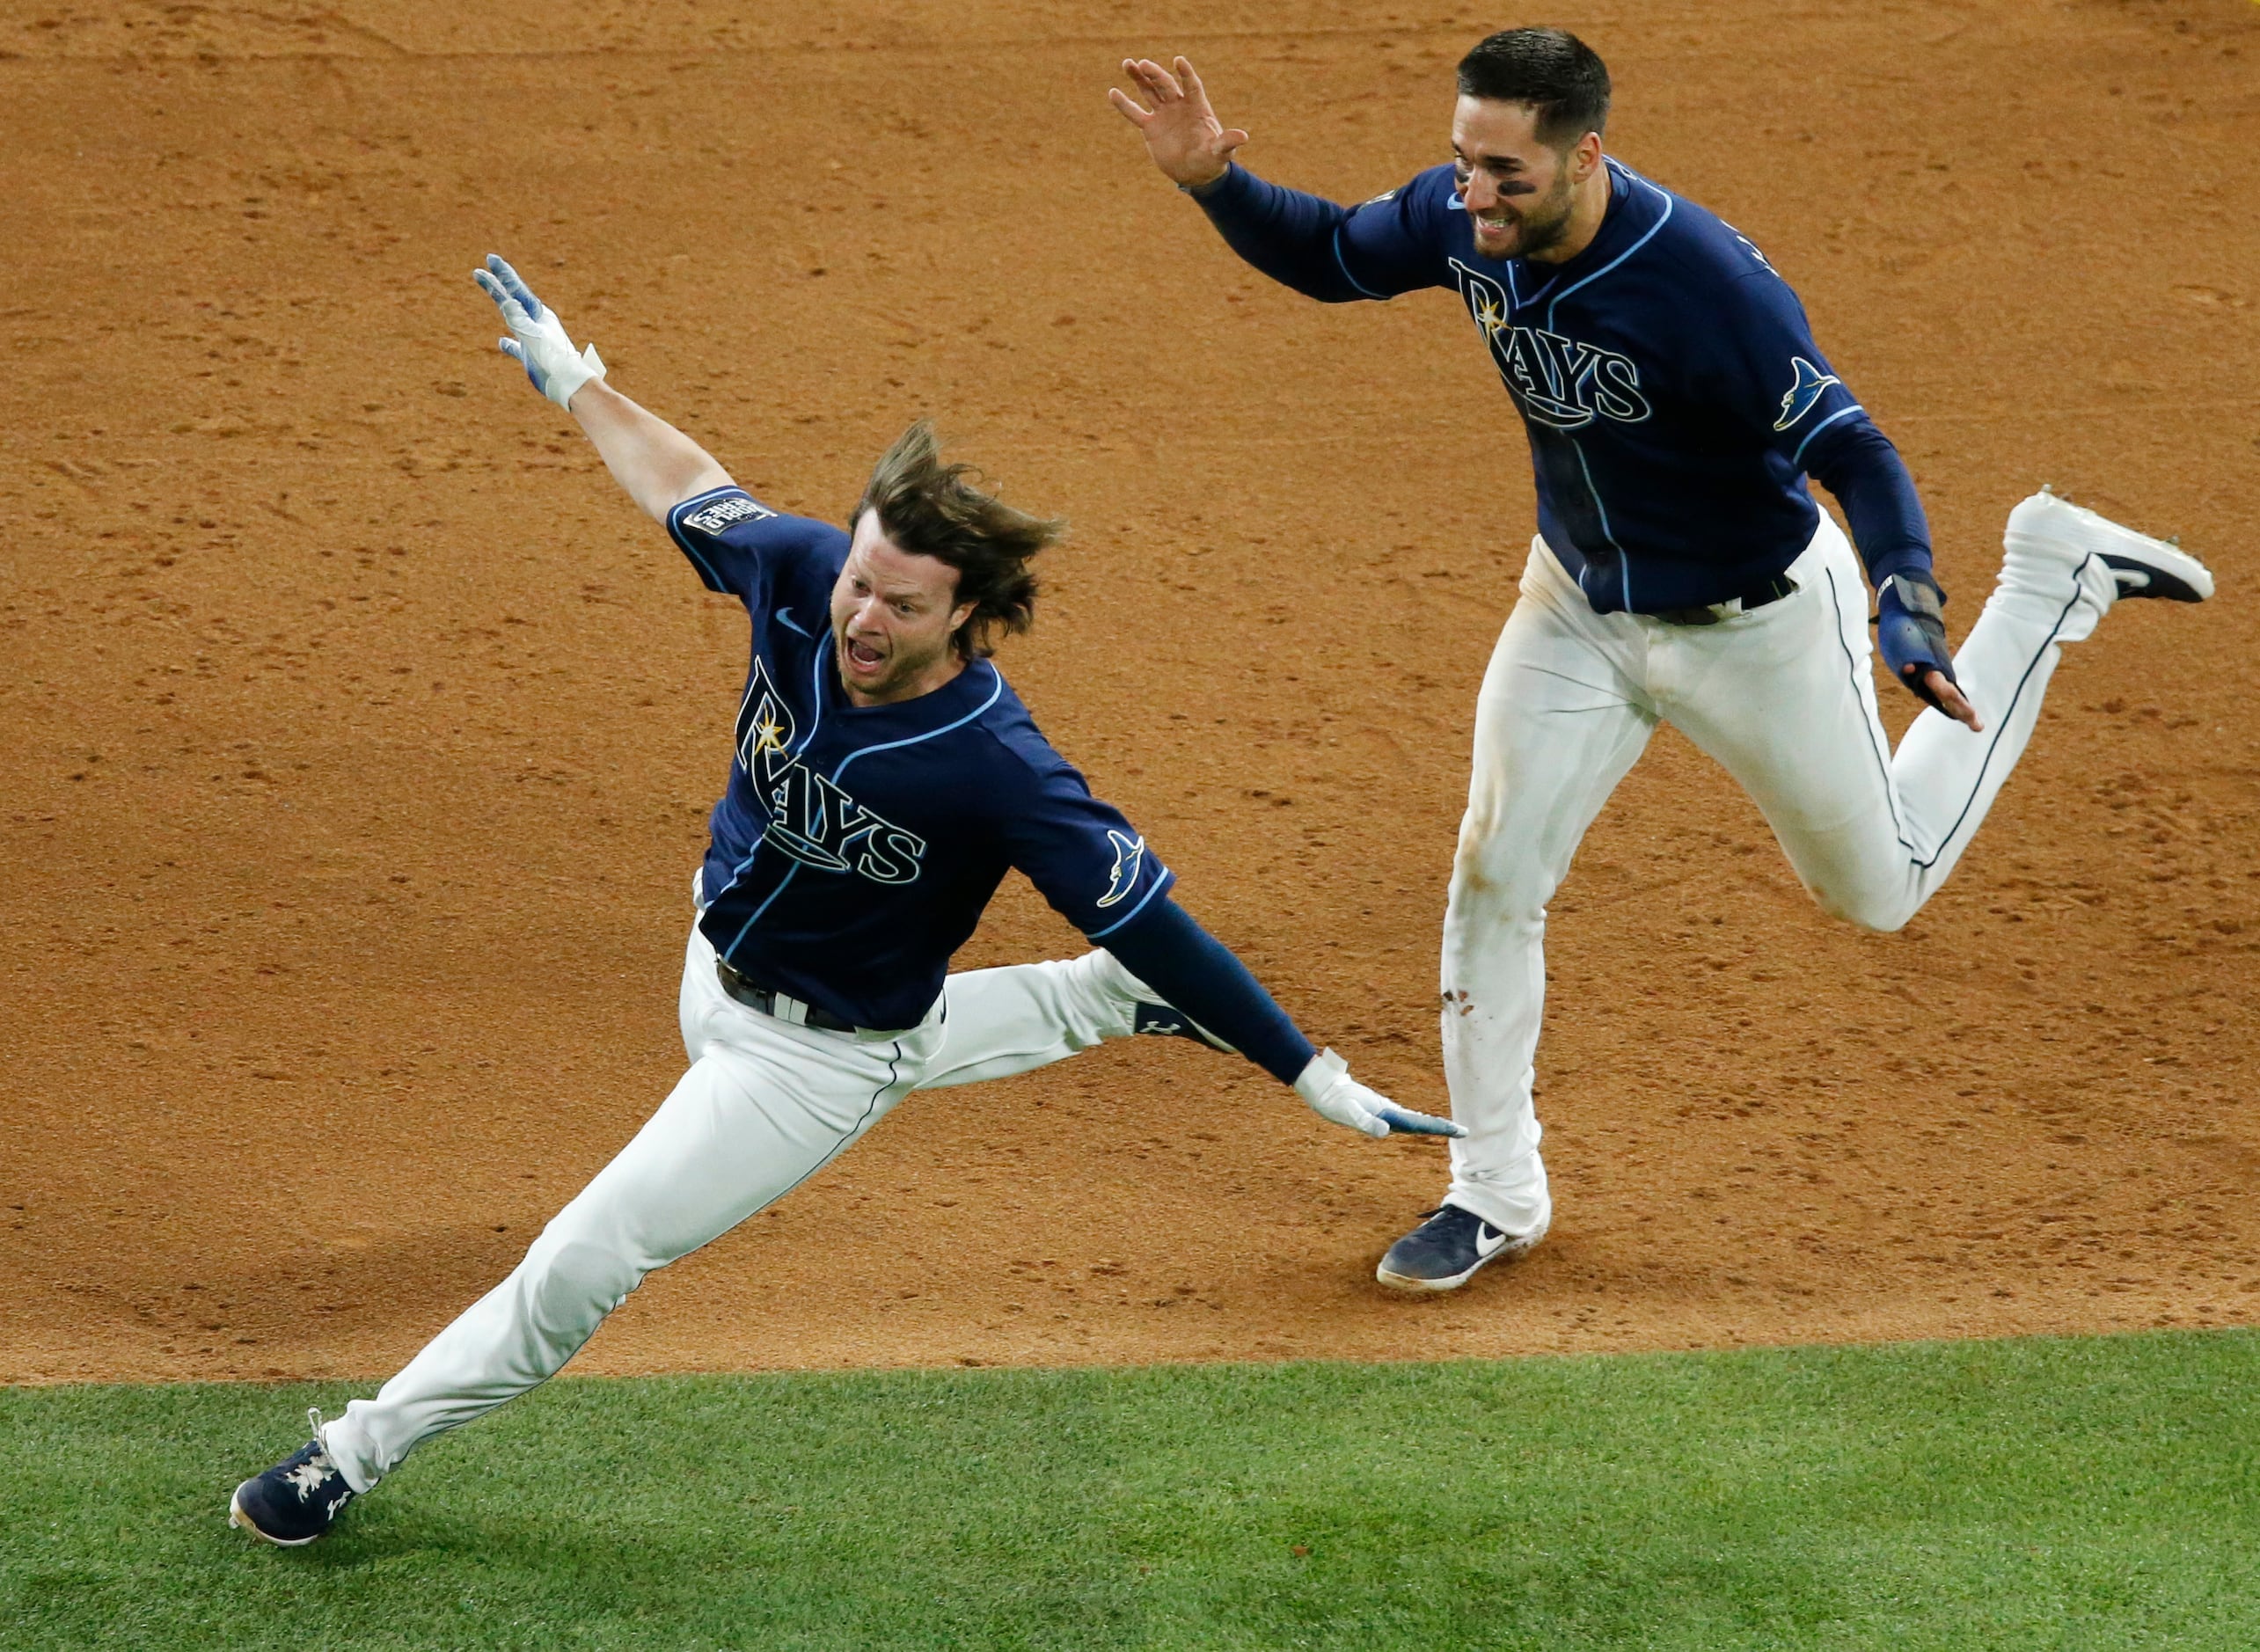 A storybook ending': Rays' dramatic Game 4 win shifts World Series